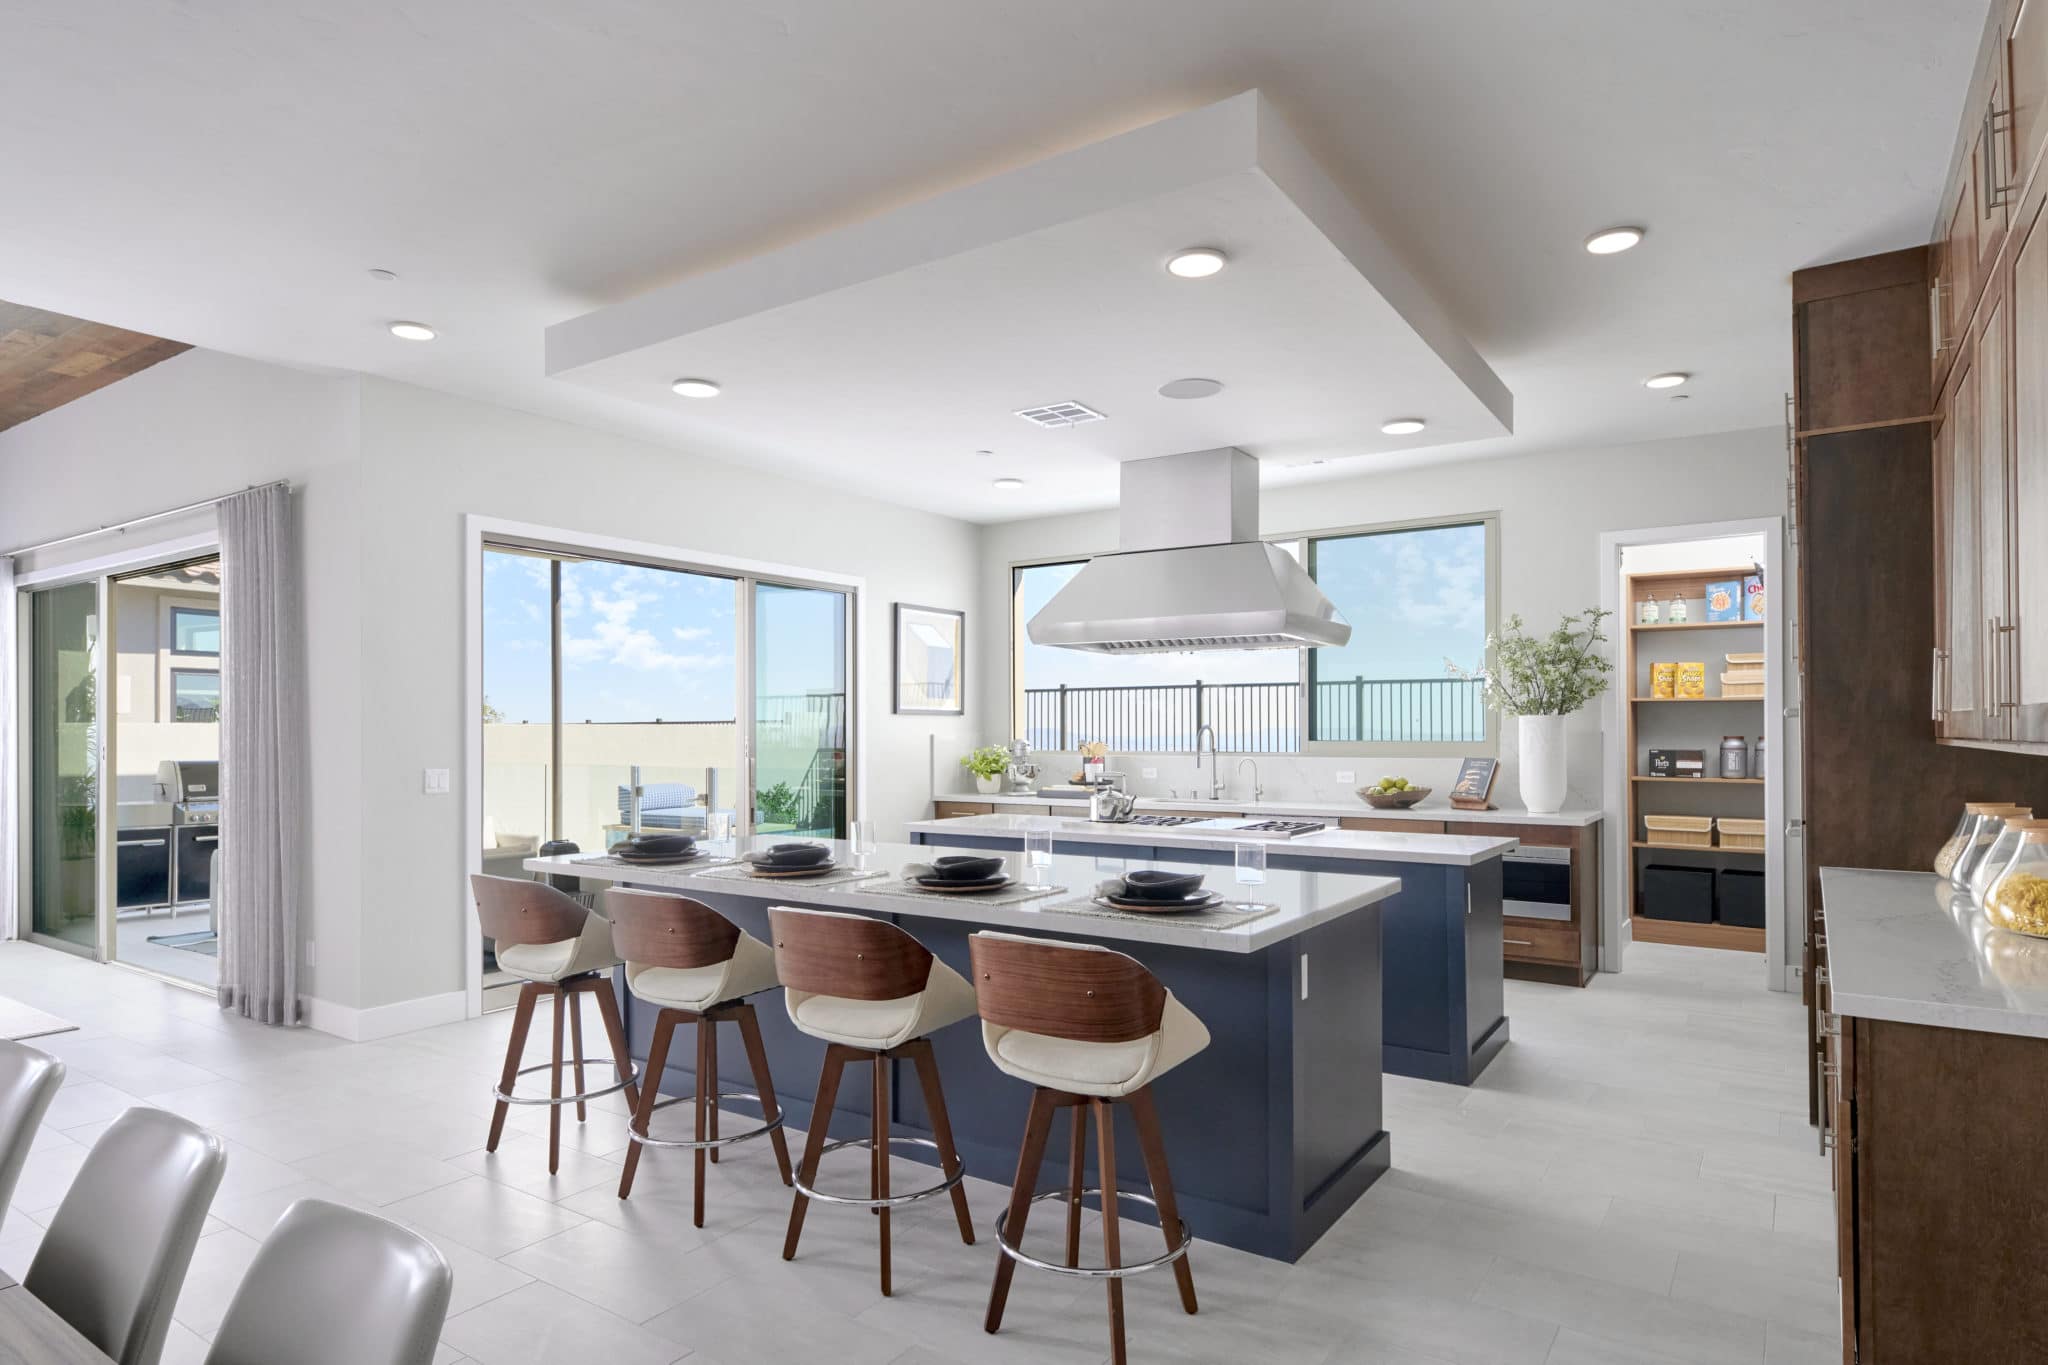 Kitchen of Plan 3 at Overlook by Tri Pointe